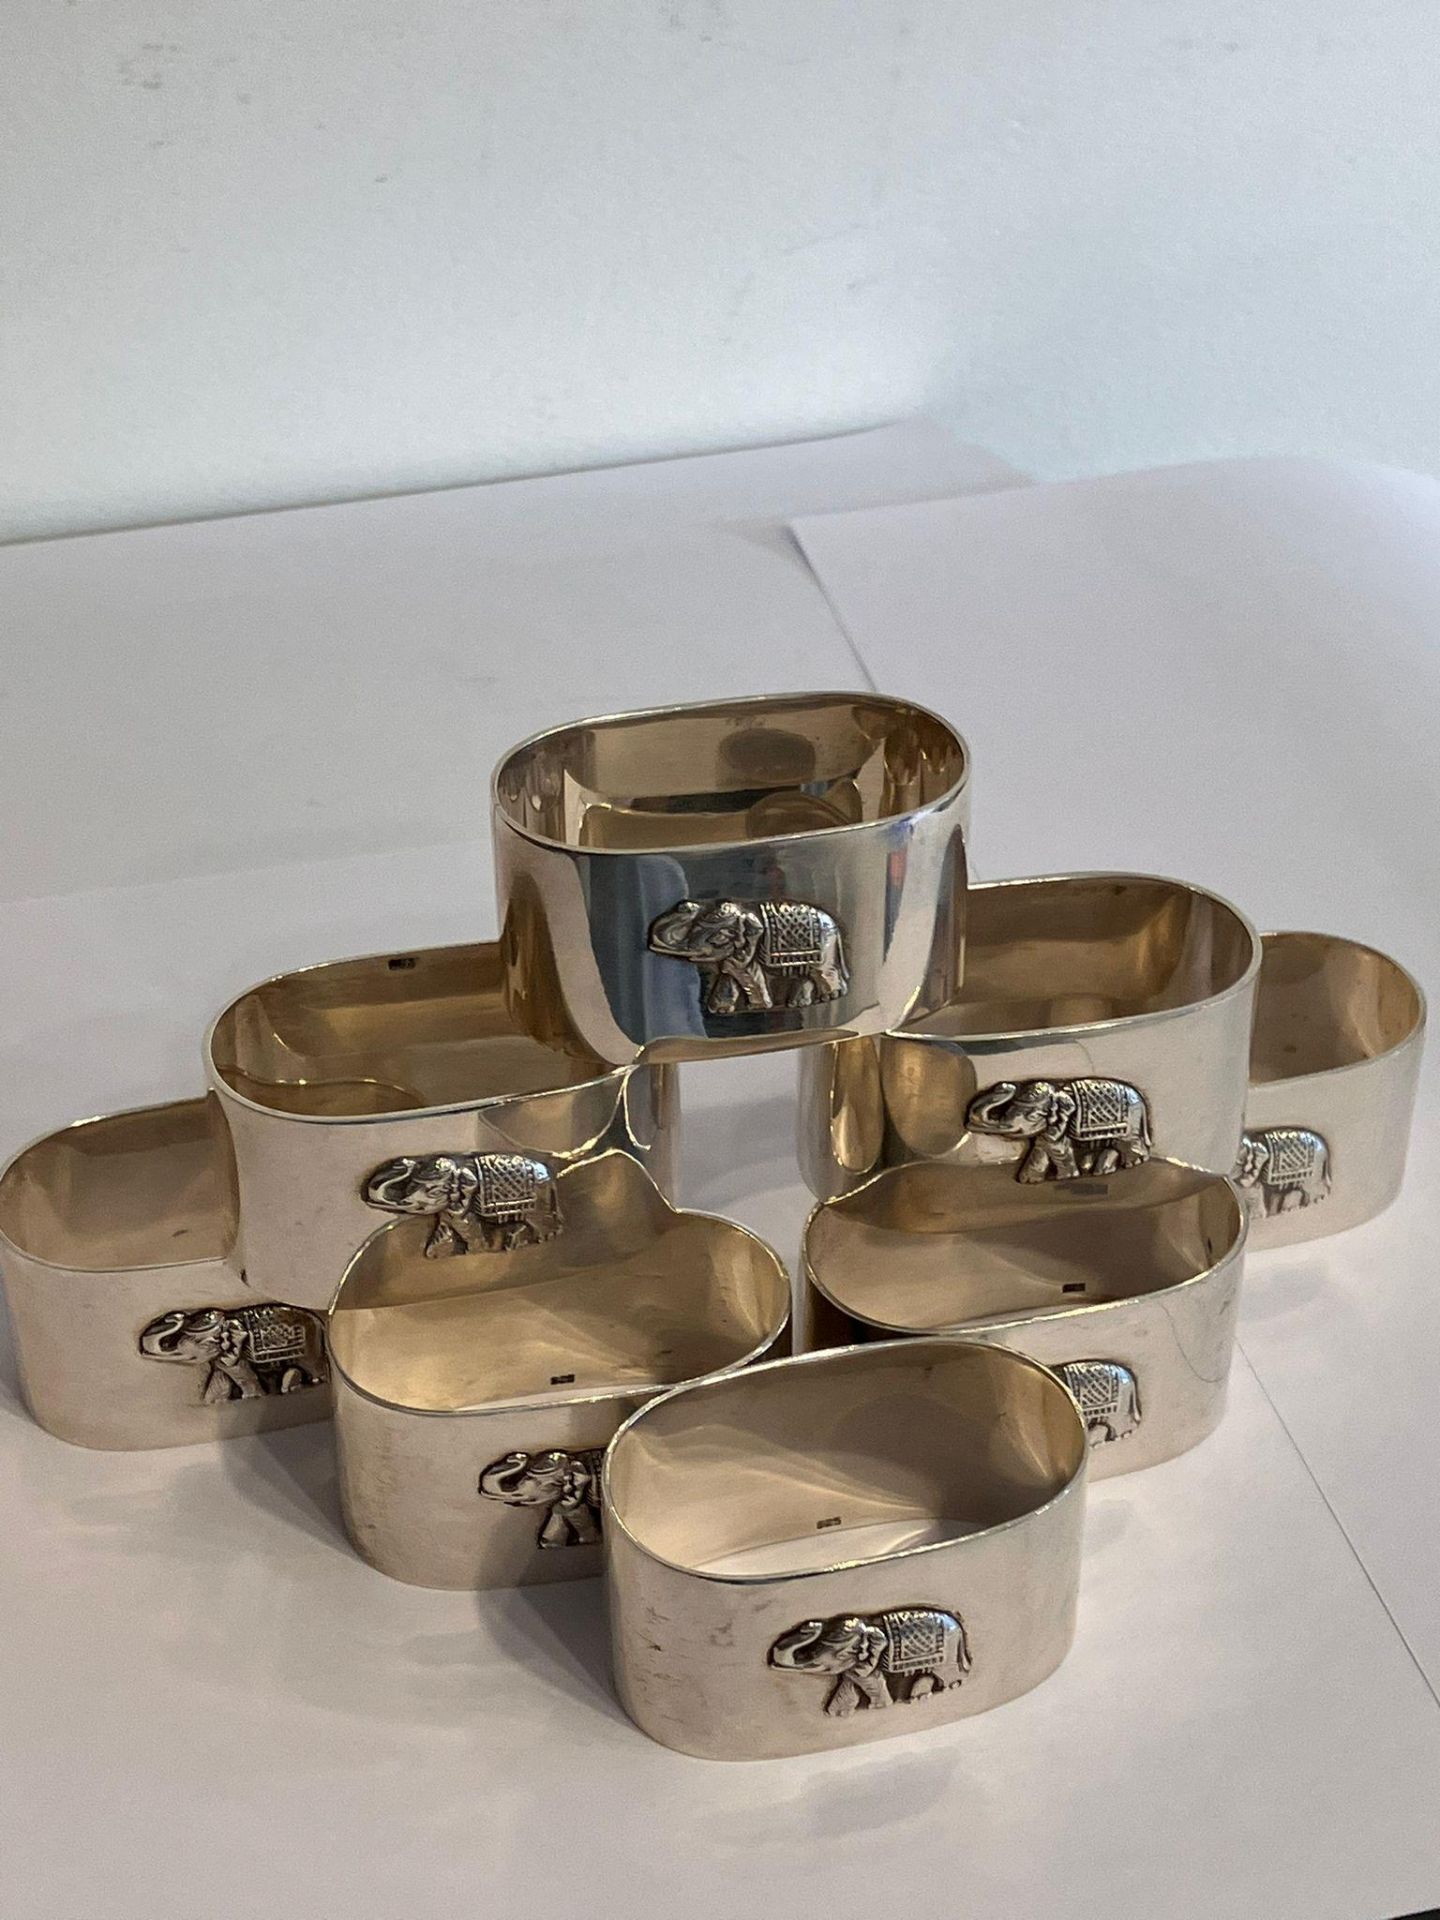 Magnificent set of 8 x SOLID SILVER NAPKIN/ SERVIETTE RINGS. Each piece Embossed with a raised - Image 8 of 9